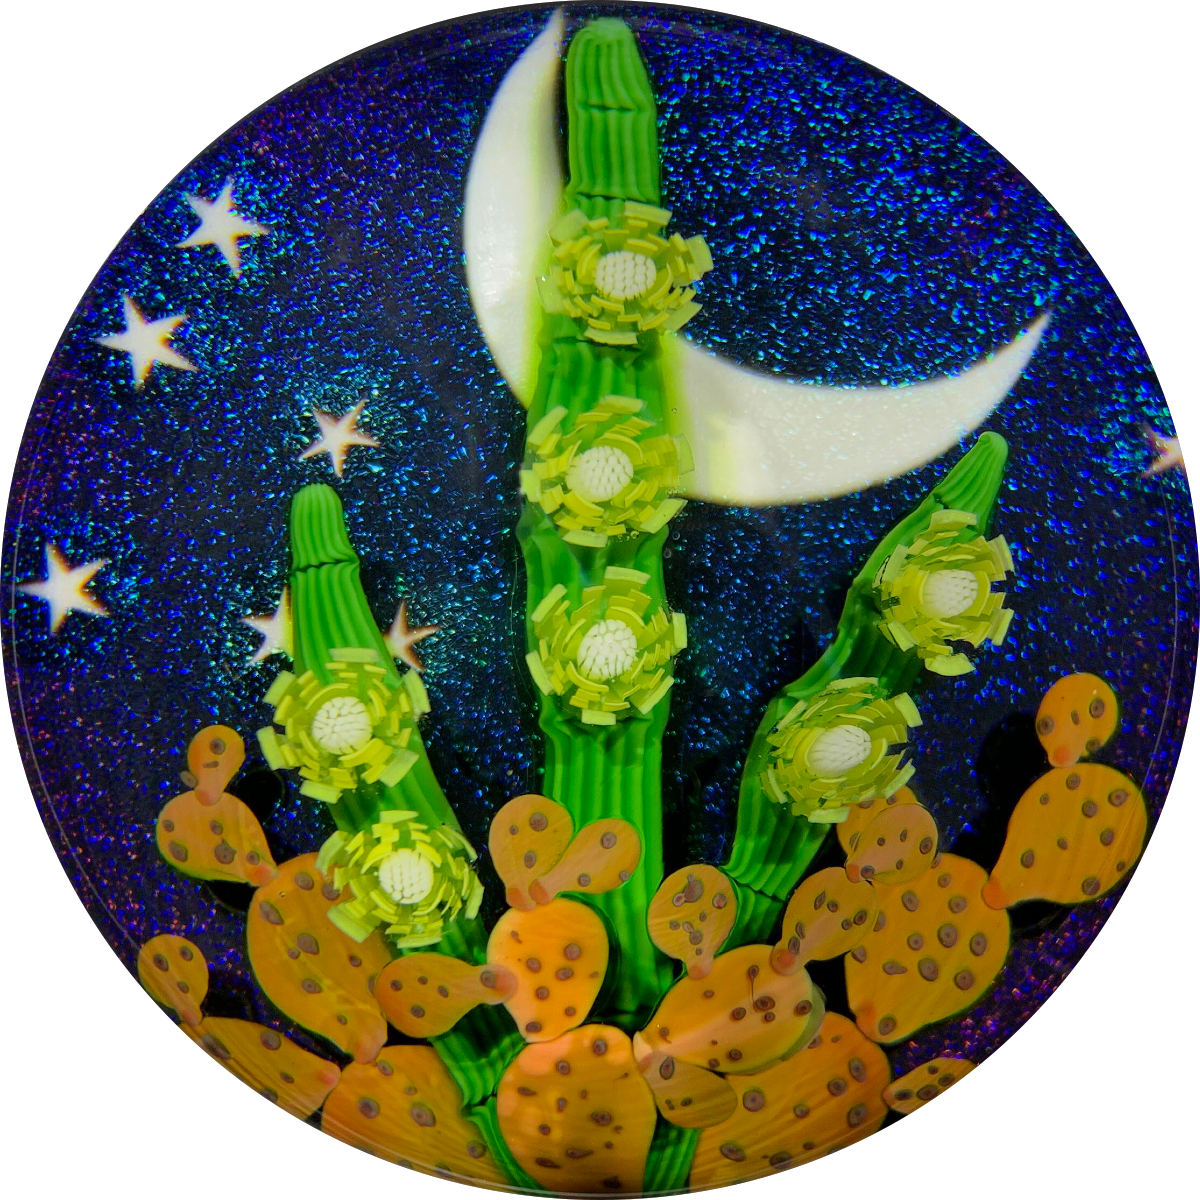 Steven Lundberg 1994 Compound Torchwork Blooming Cactus Against a Night Sky "Queen of the Night"